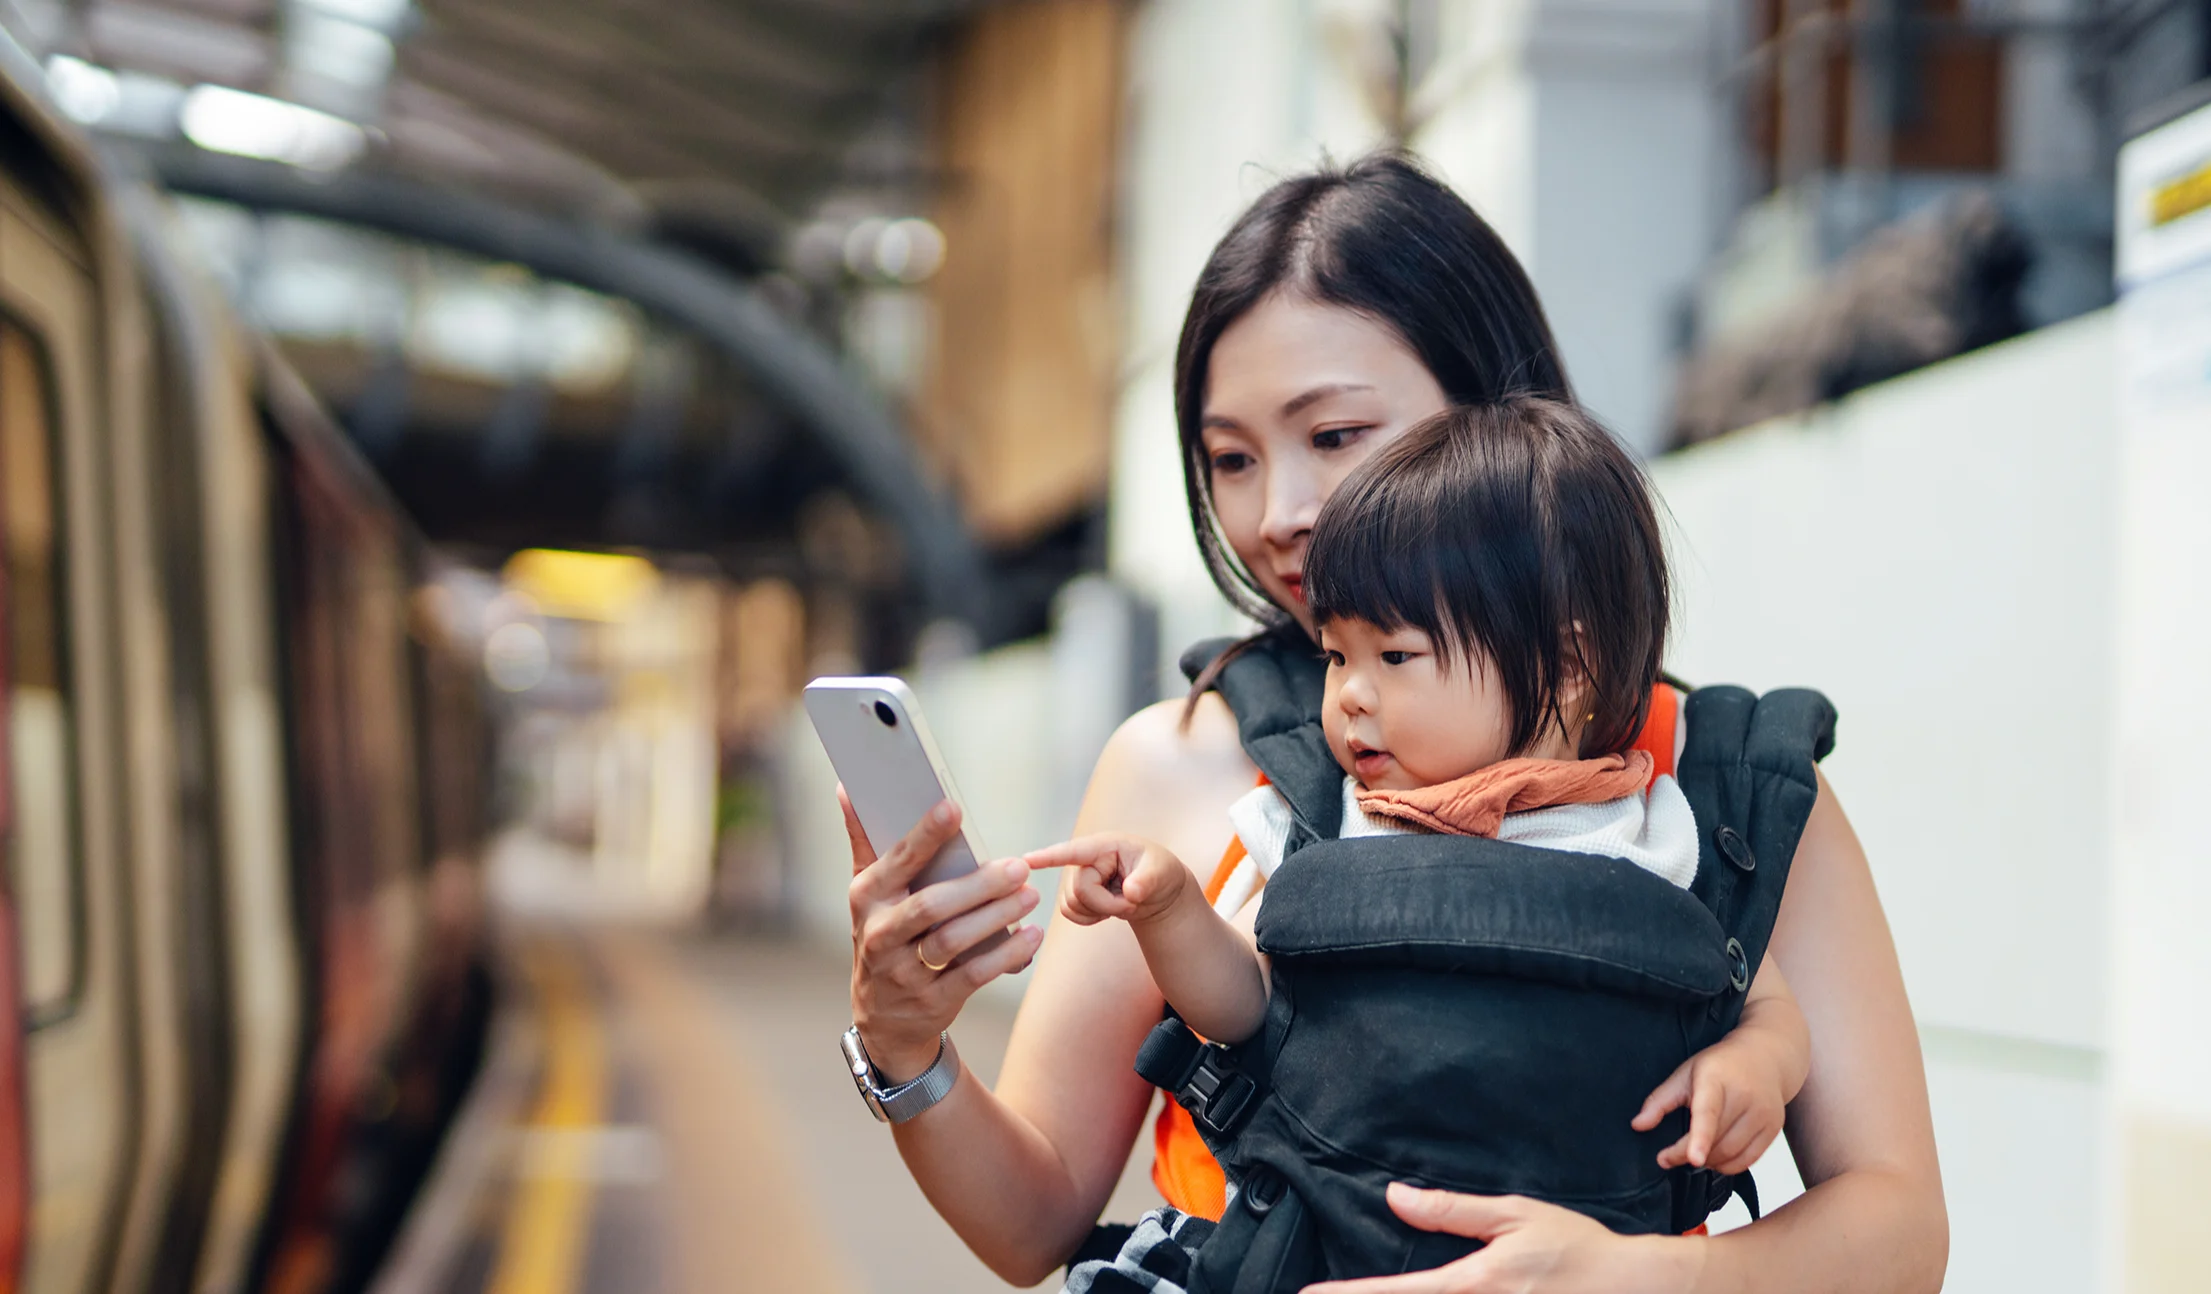 A woman wearing a baby in a front-facing carrier checks her mobile phone on a station platform.